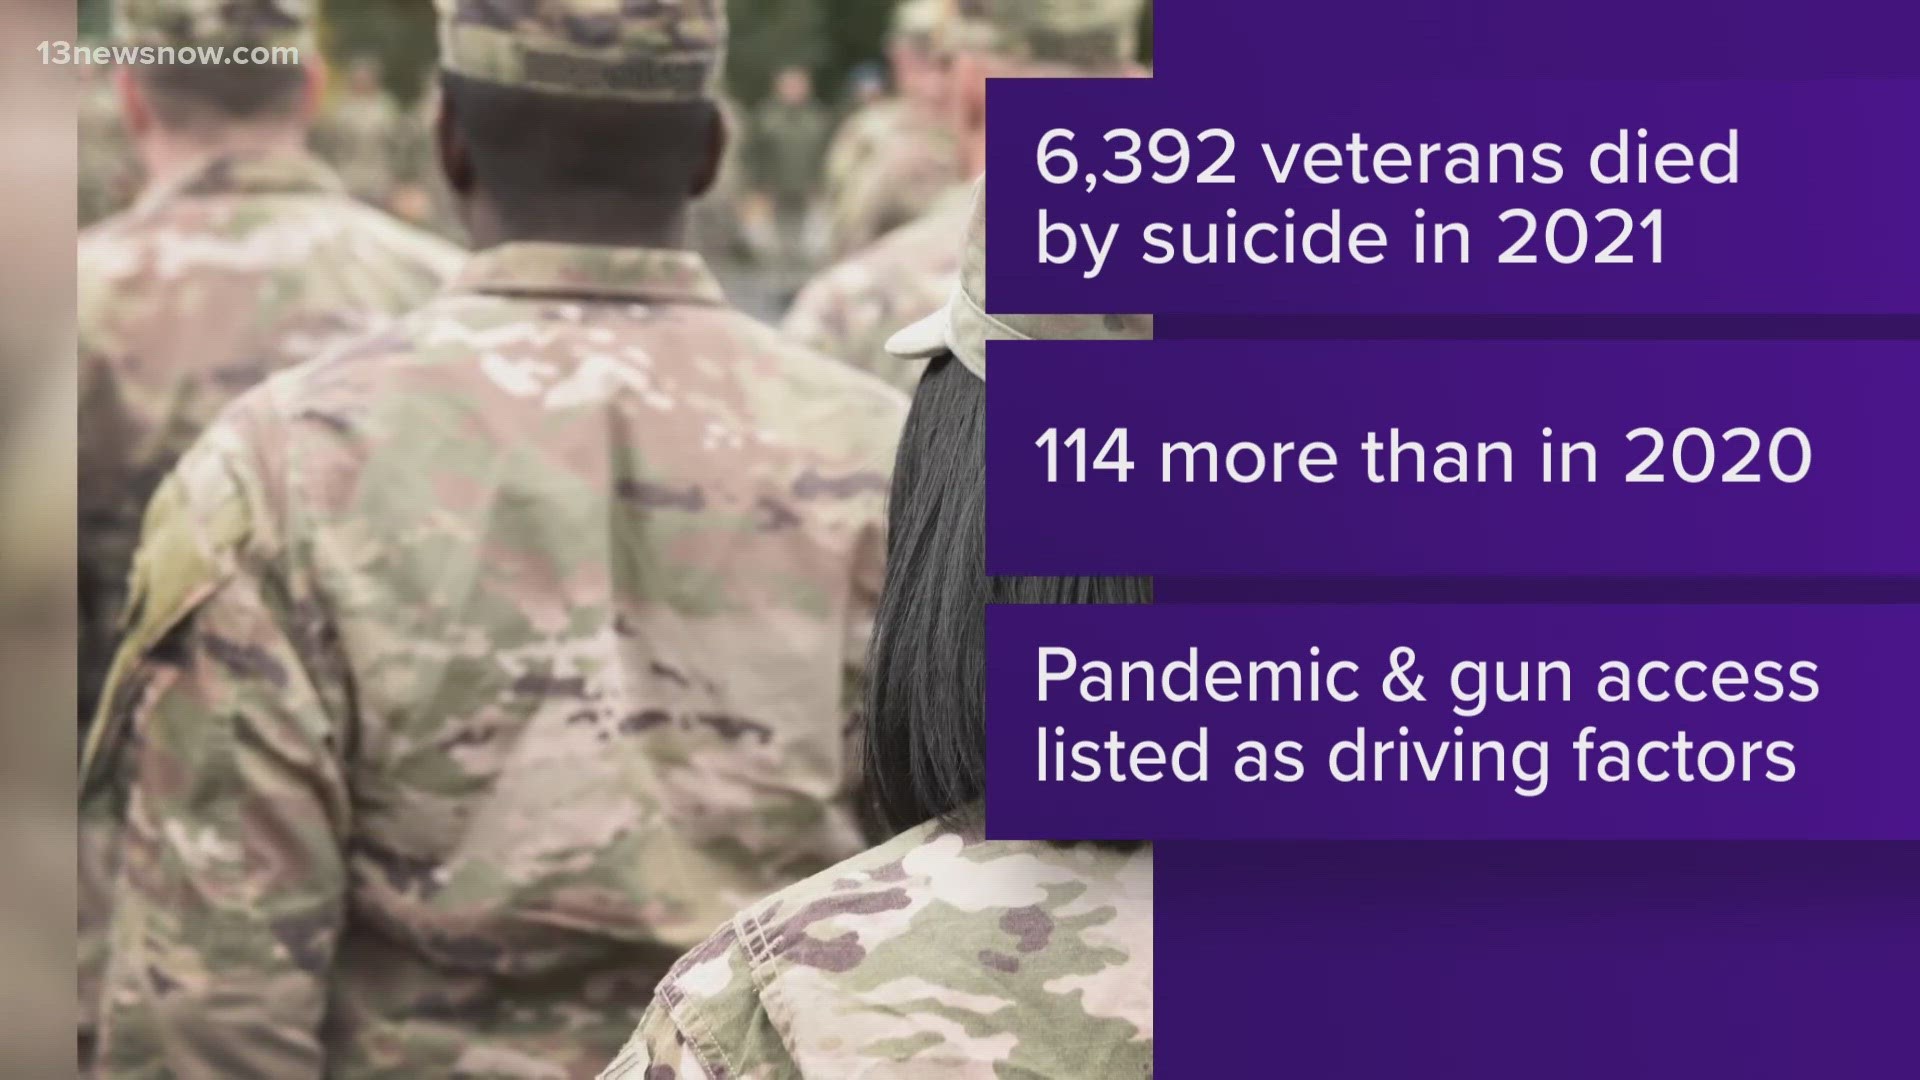 It shows that 6,392 veterans died by suicide in 2021, more than in 2020.